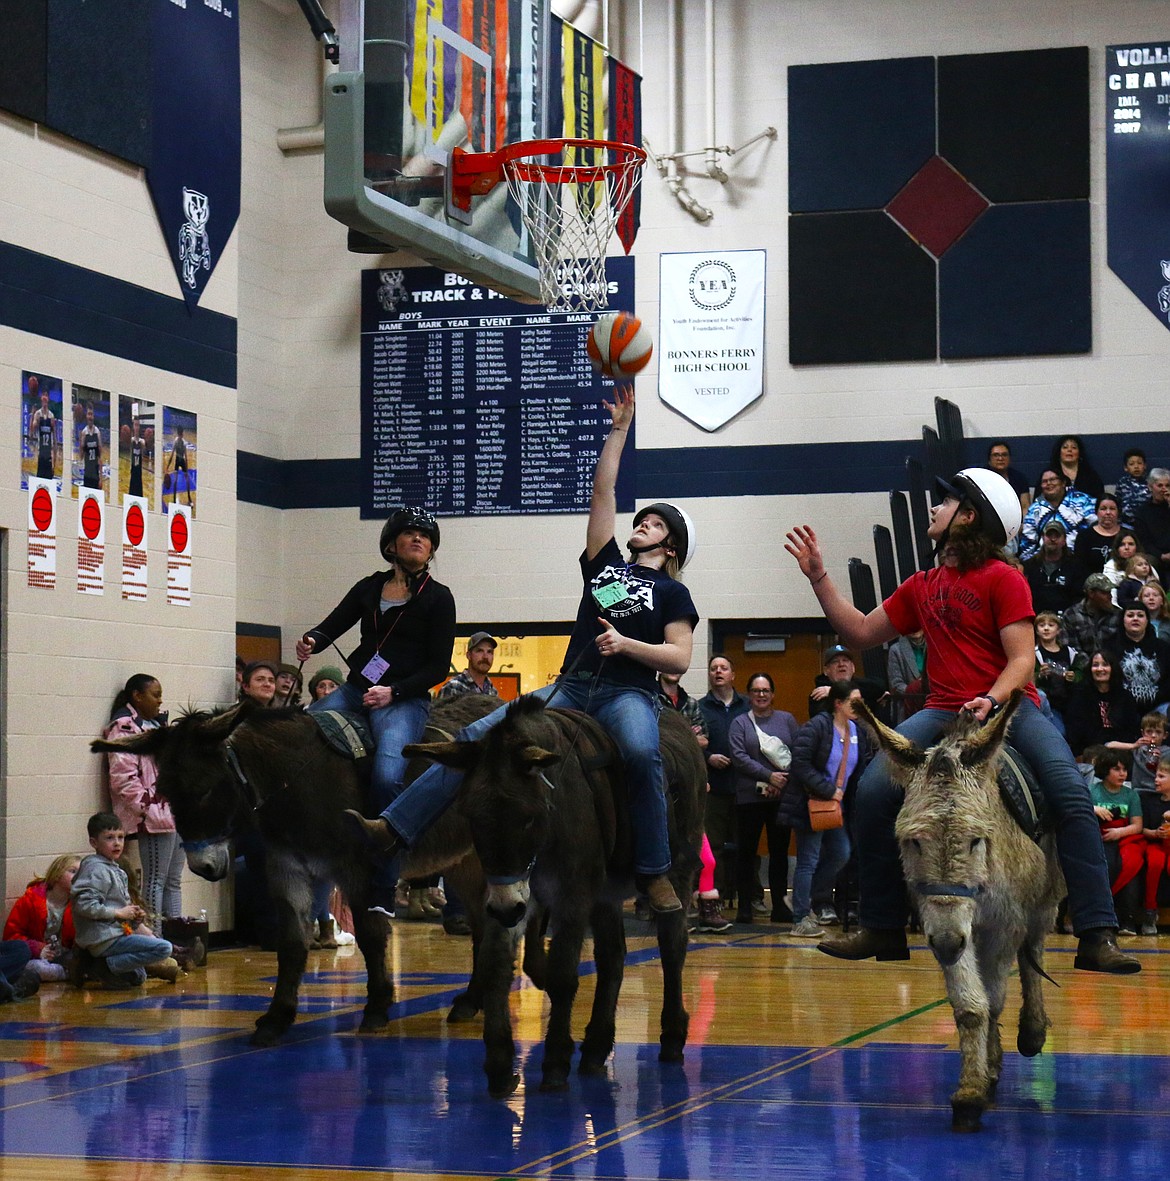 Basket attempt by Evelyn Chaney at Donkey Basketball.